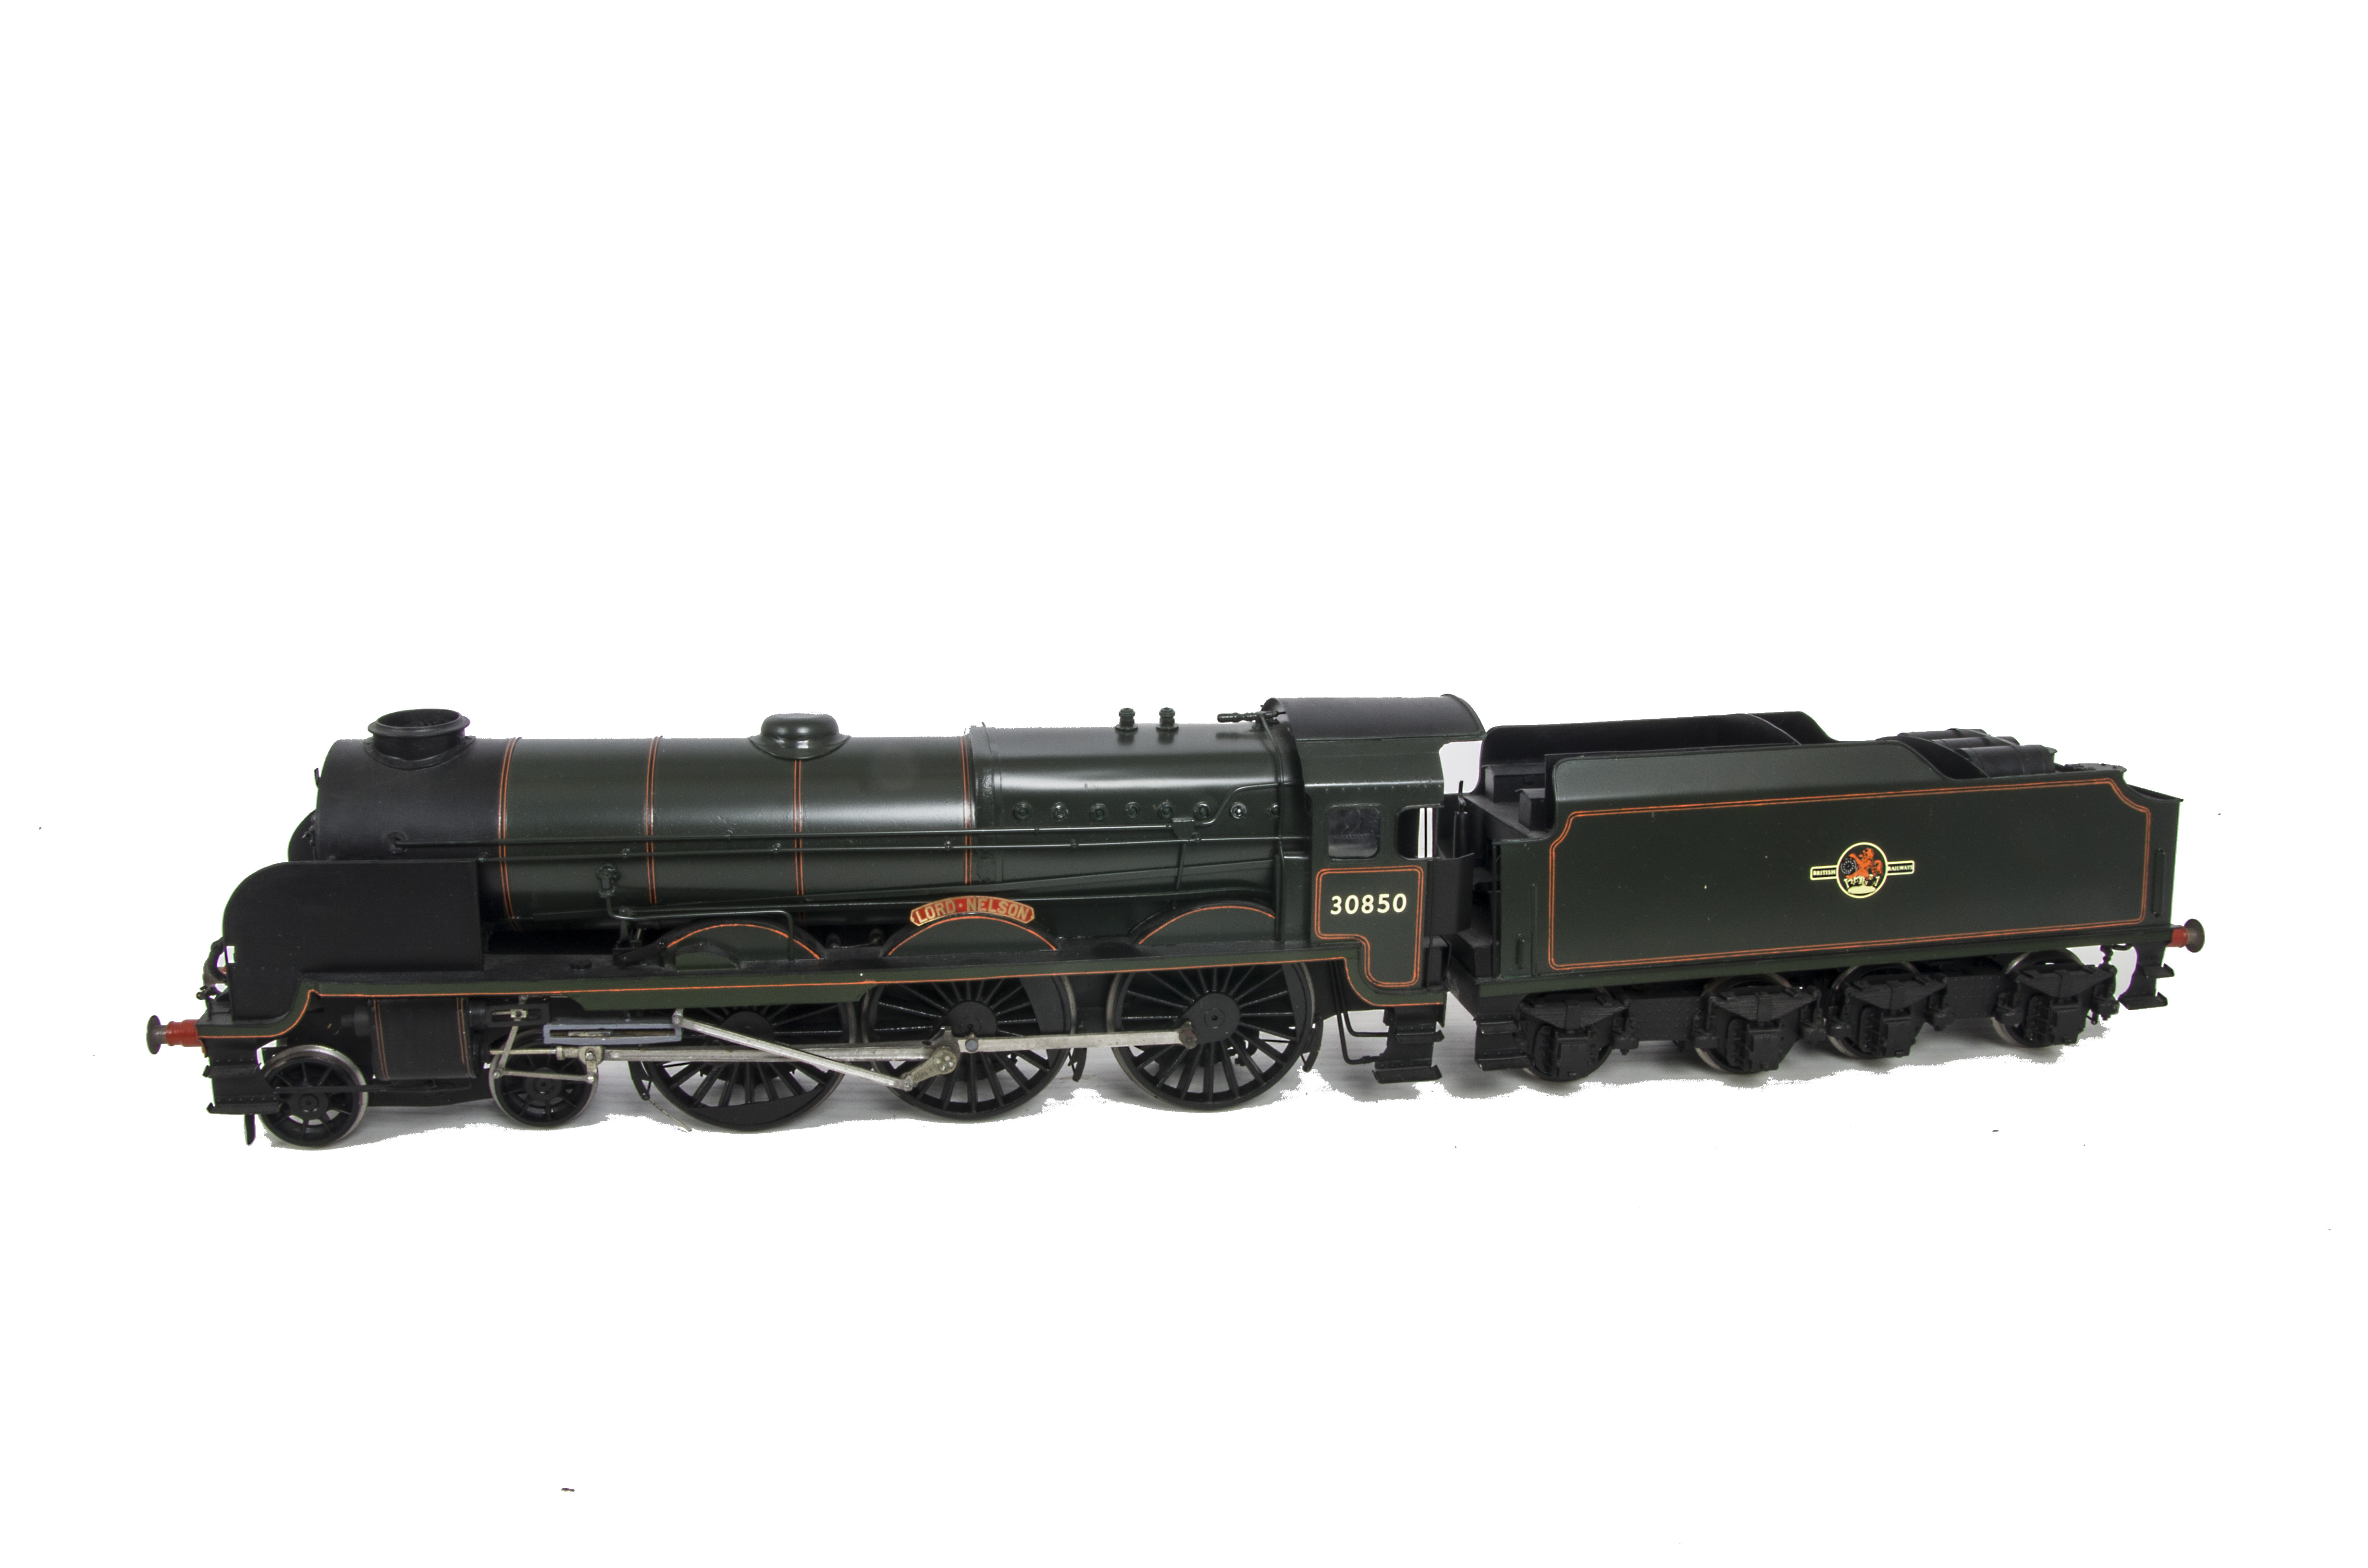 A Finescale Gauge I 2-rail Electric Scratchbuilt ‘Lord Nelson’ Locomotive and Tender by Mike